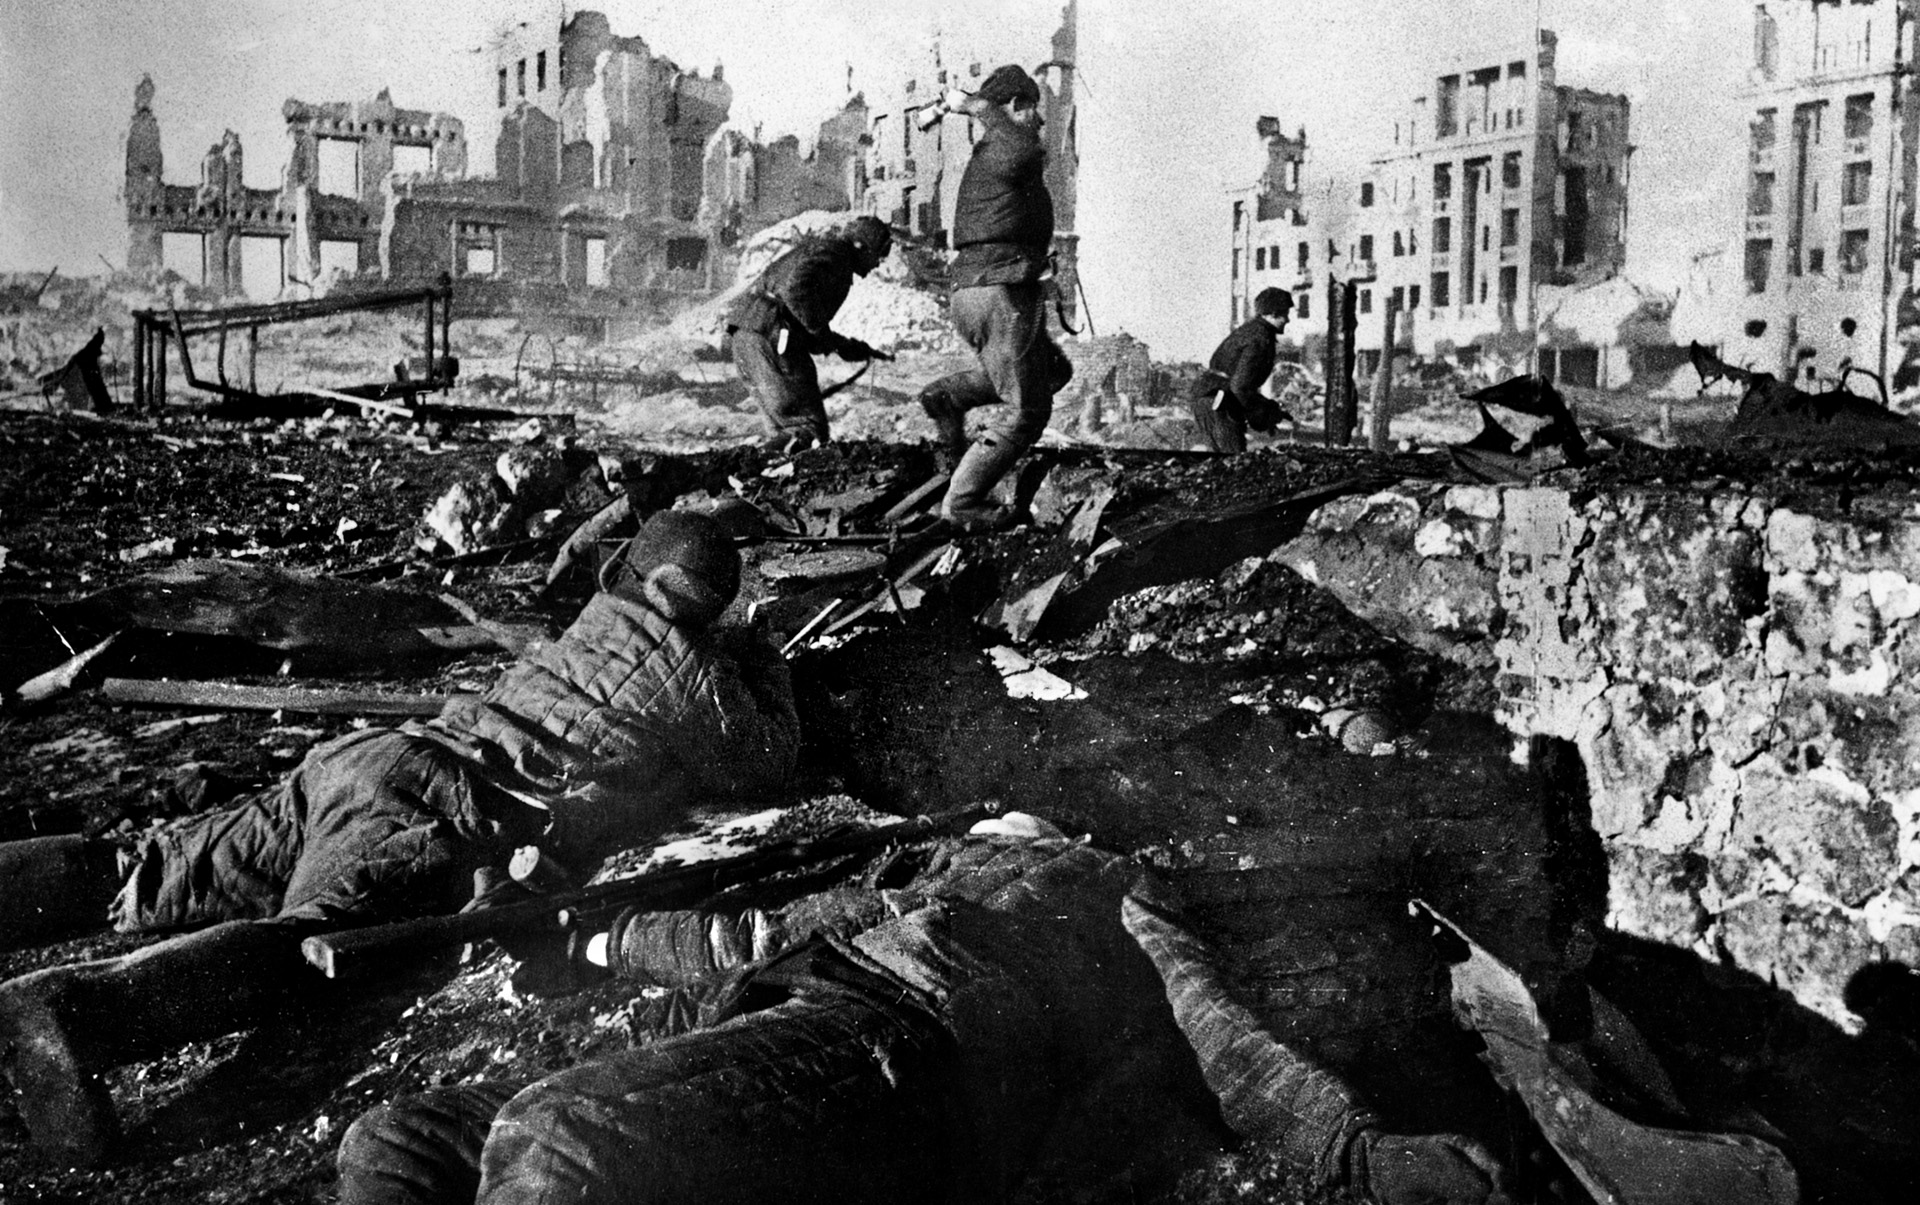 Victorious members of the Soviet Sixty-second Army advance through the rubble of Stalingrad in what is probably a staged photo taken after the battle.